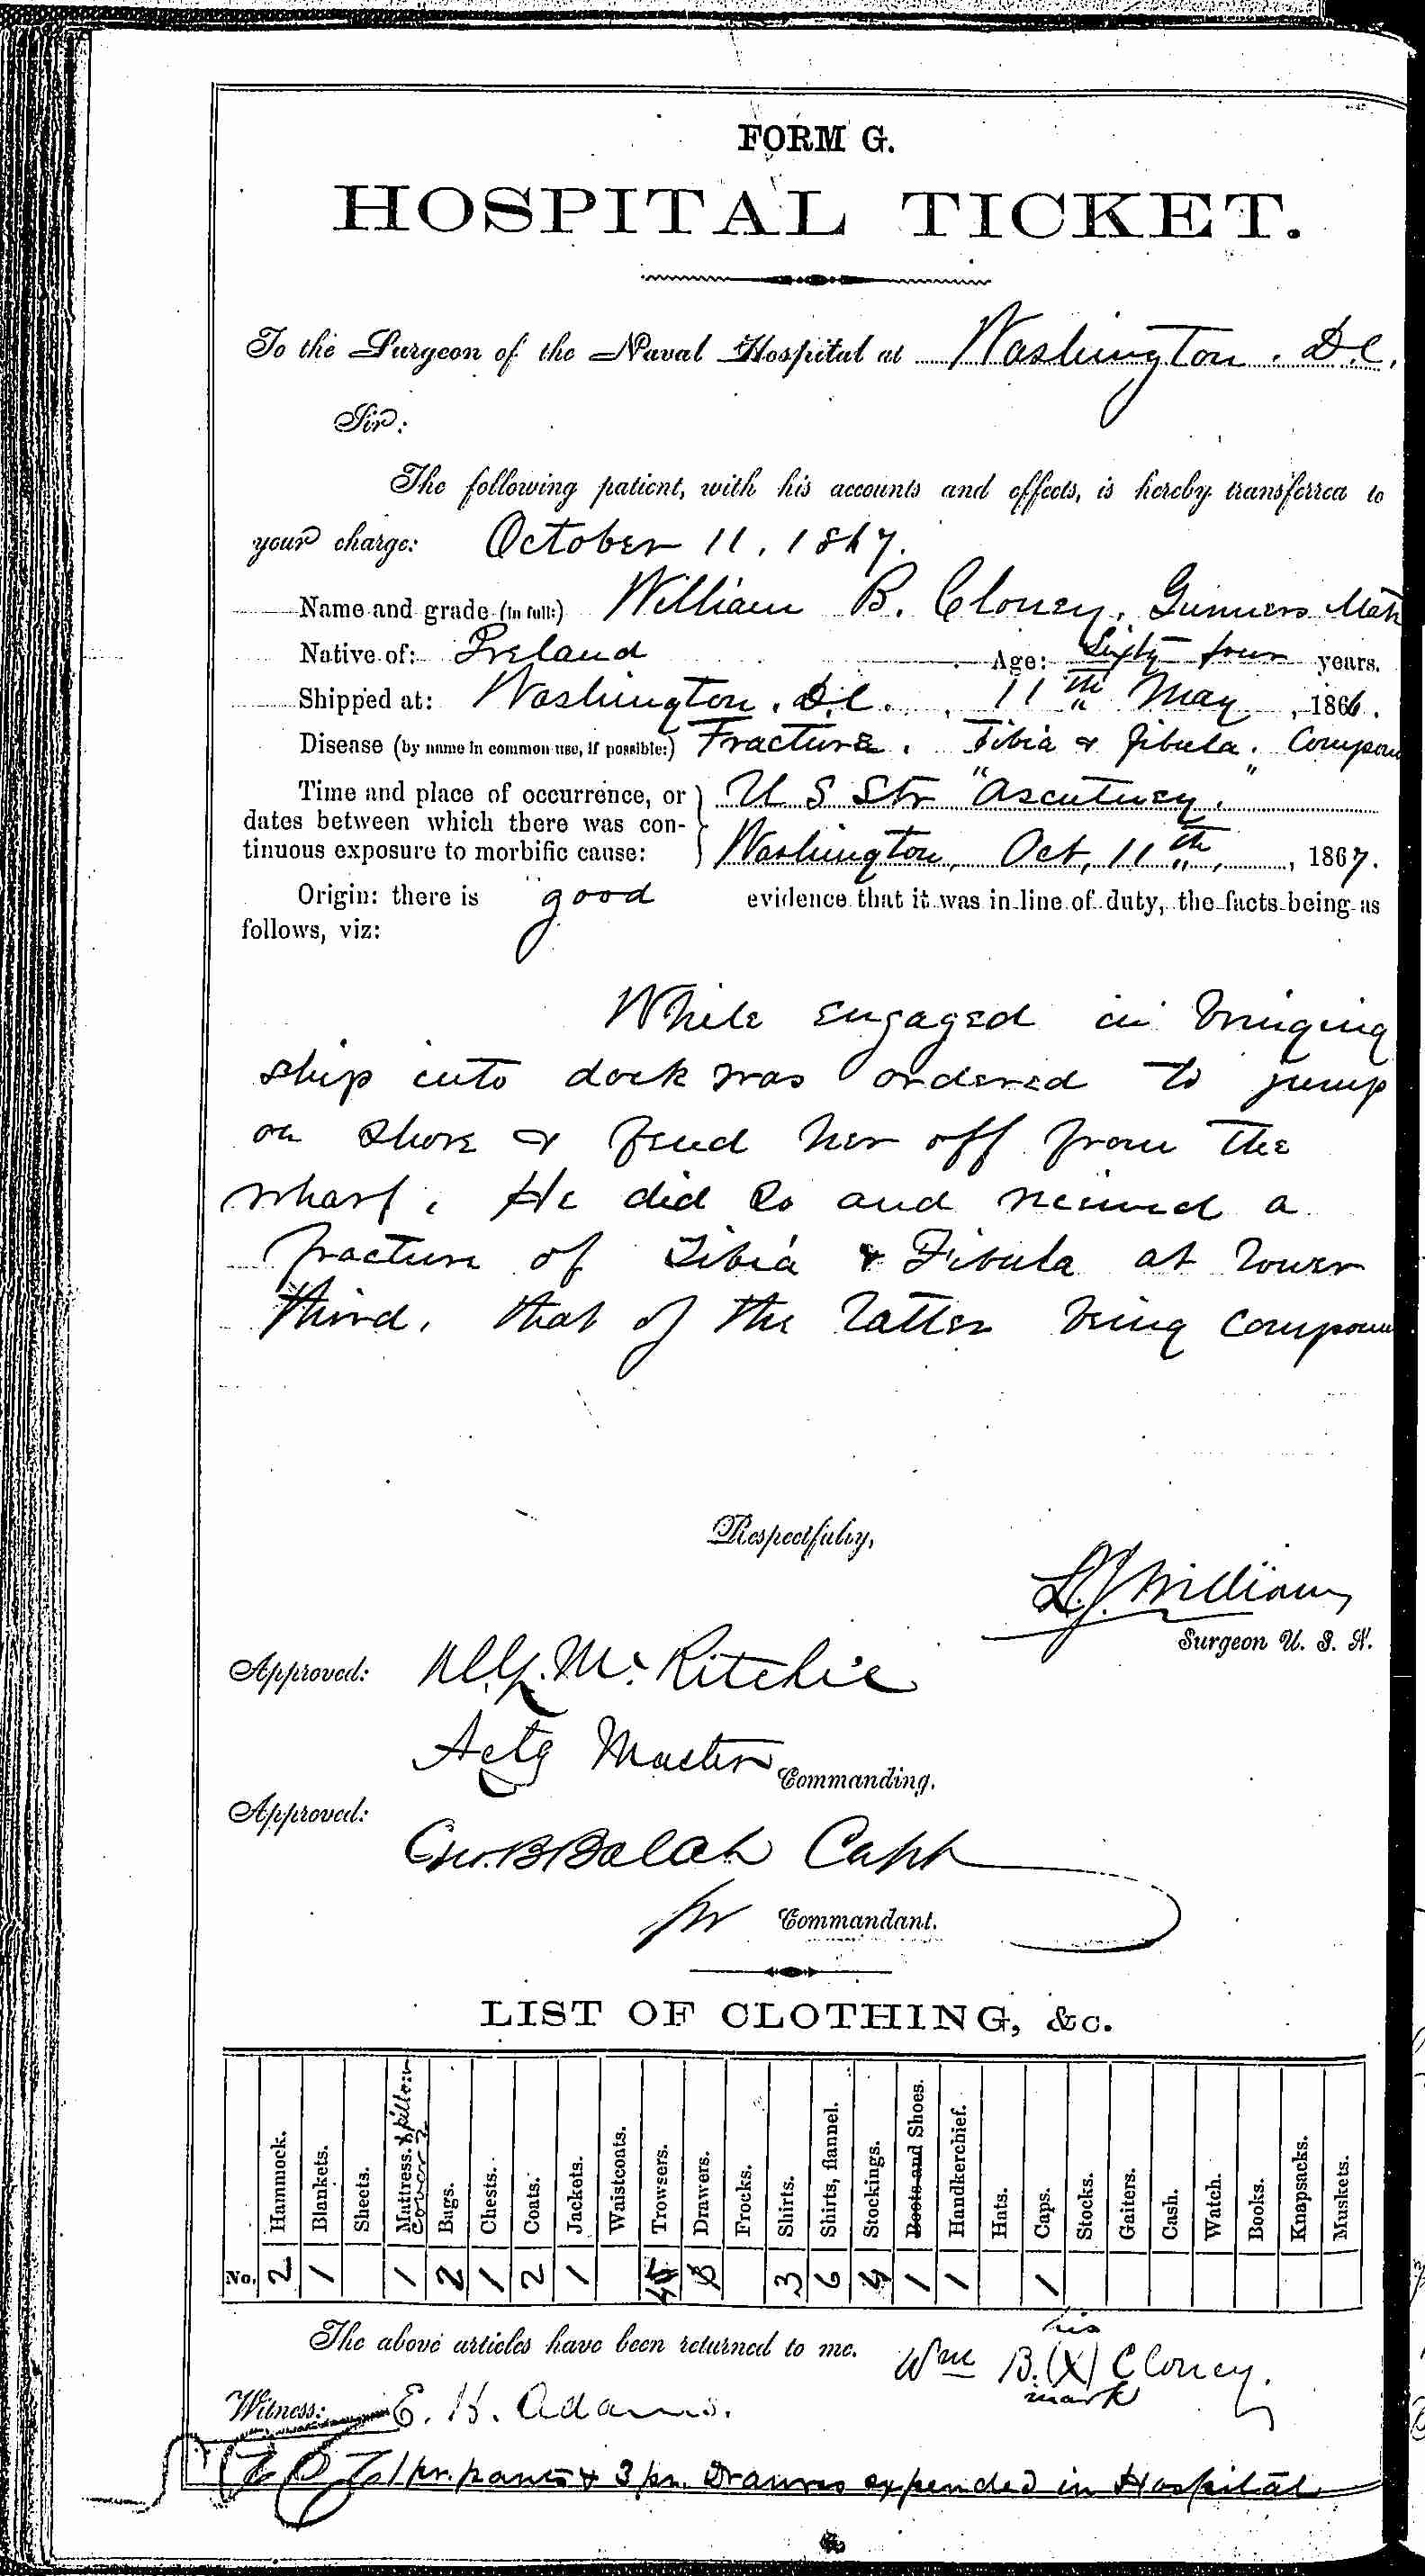 Entry for William B. Cloney (page 1 of 2) in the log Hospital Tickets and Case Papers - Naval Hospital - Washington, D.C. - 1866-68